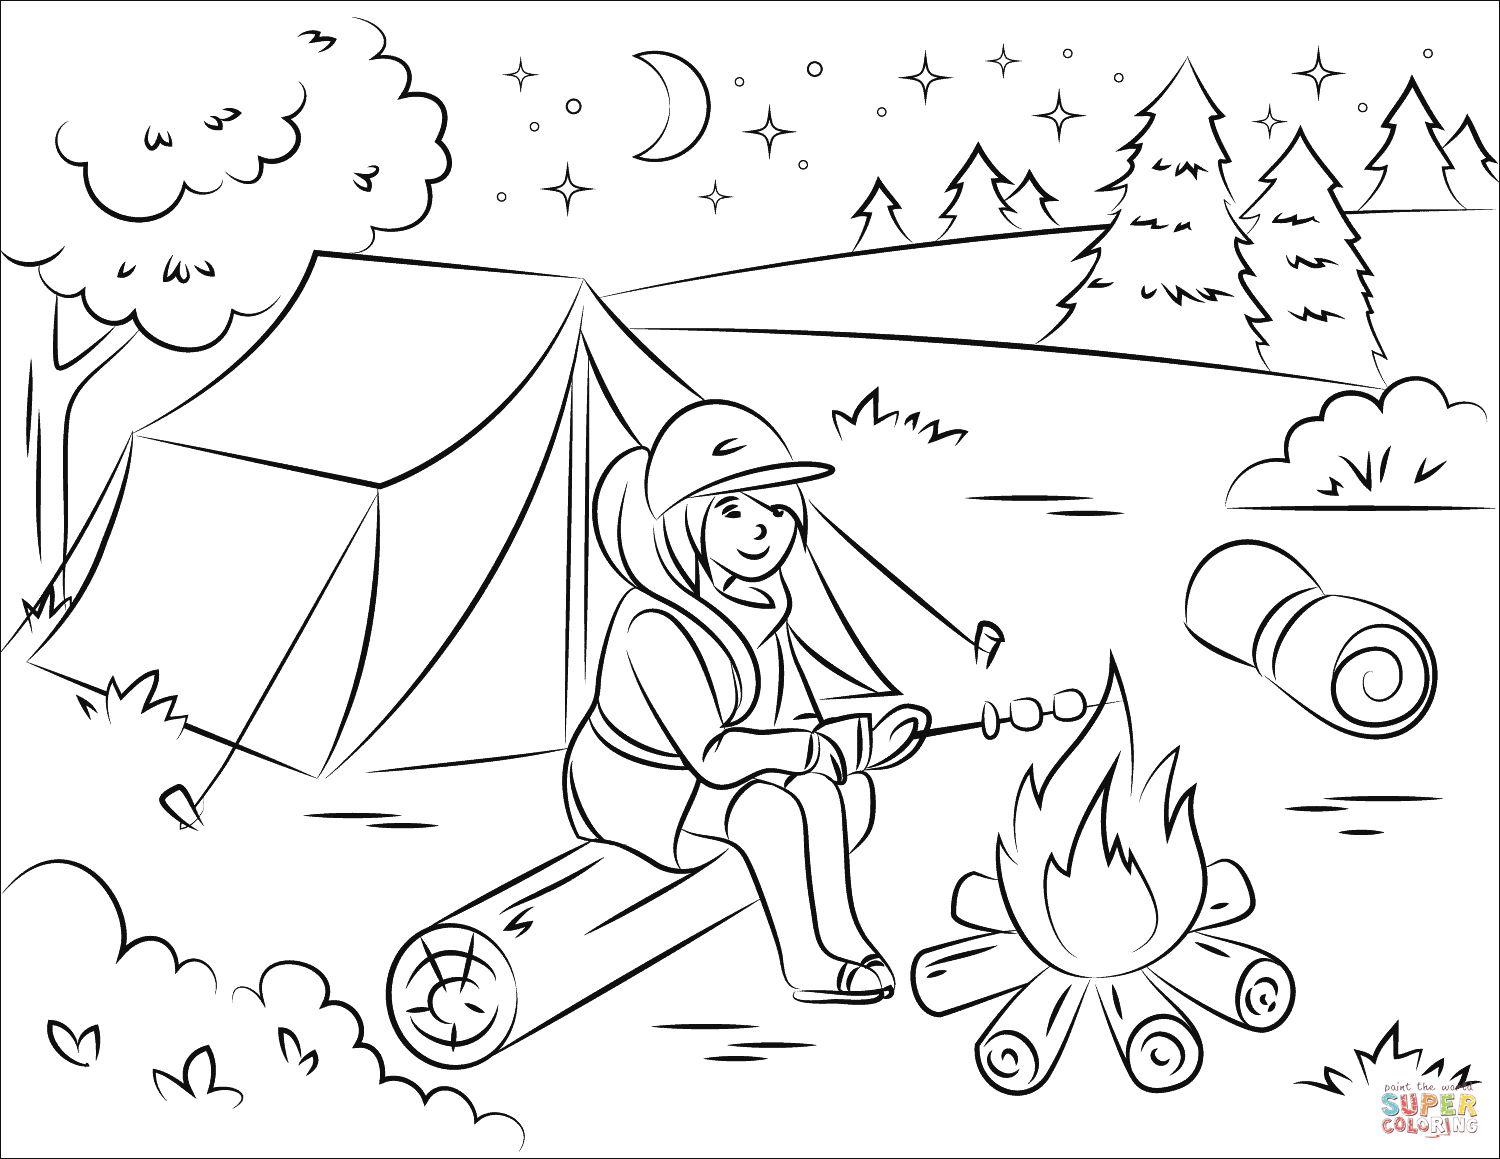 Girl Roasting Marshmallow over Campfire coloring page | Free Printable Coloring  Pages